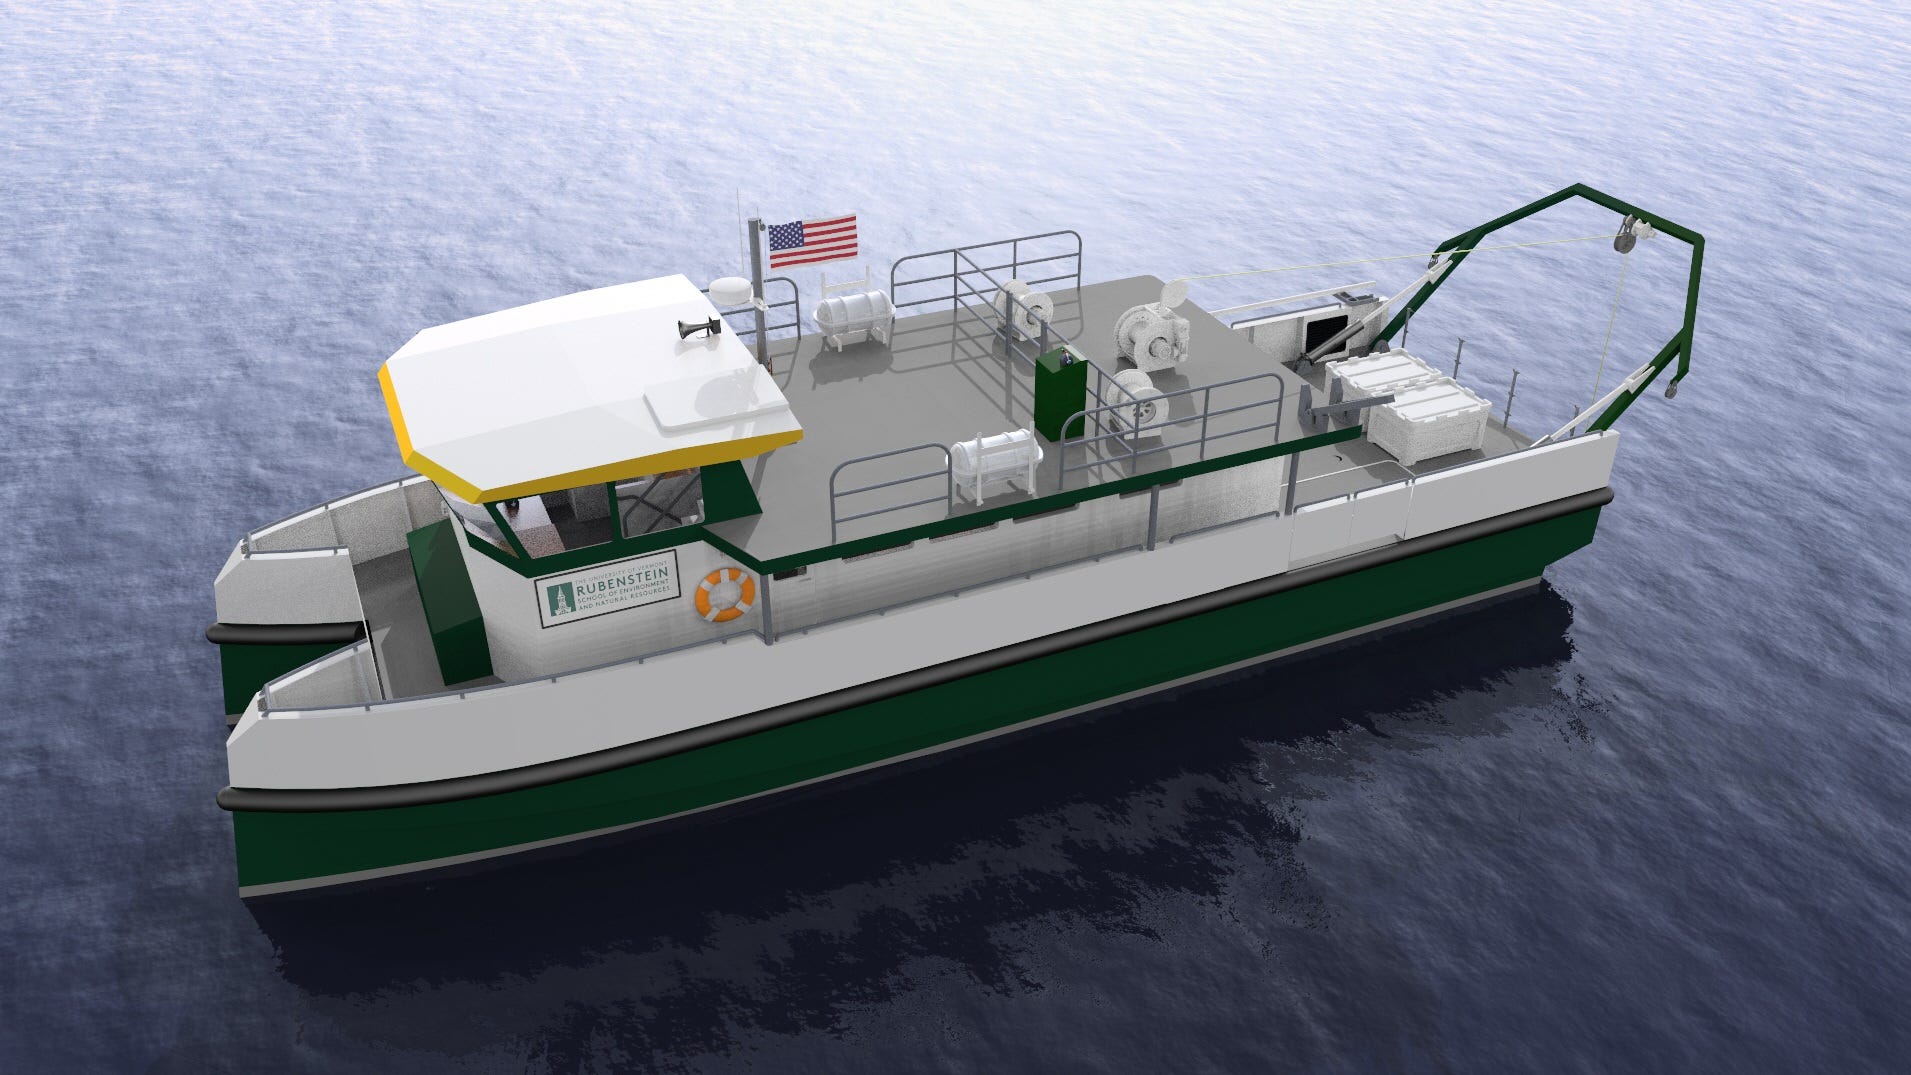 Hybrid boat 3.9M UVM research vehicle features diesel/electric power